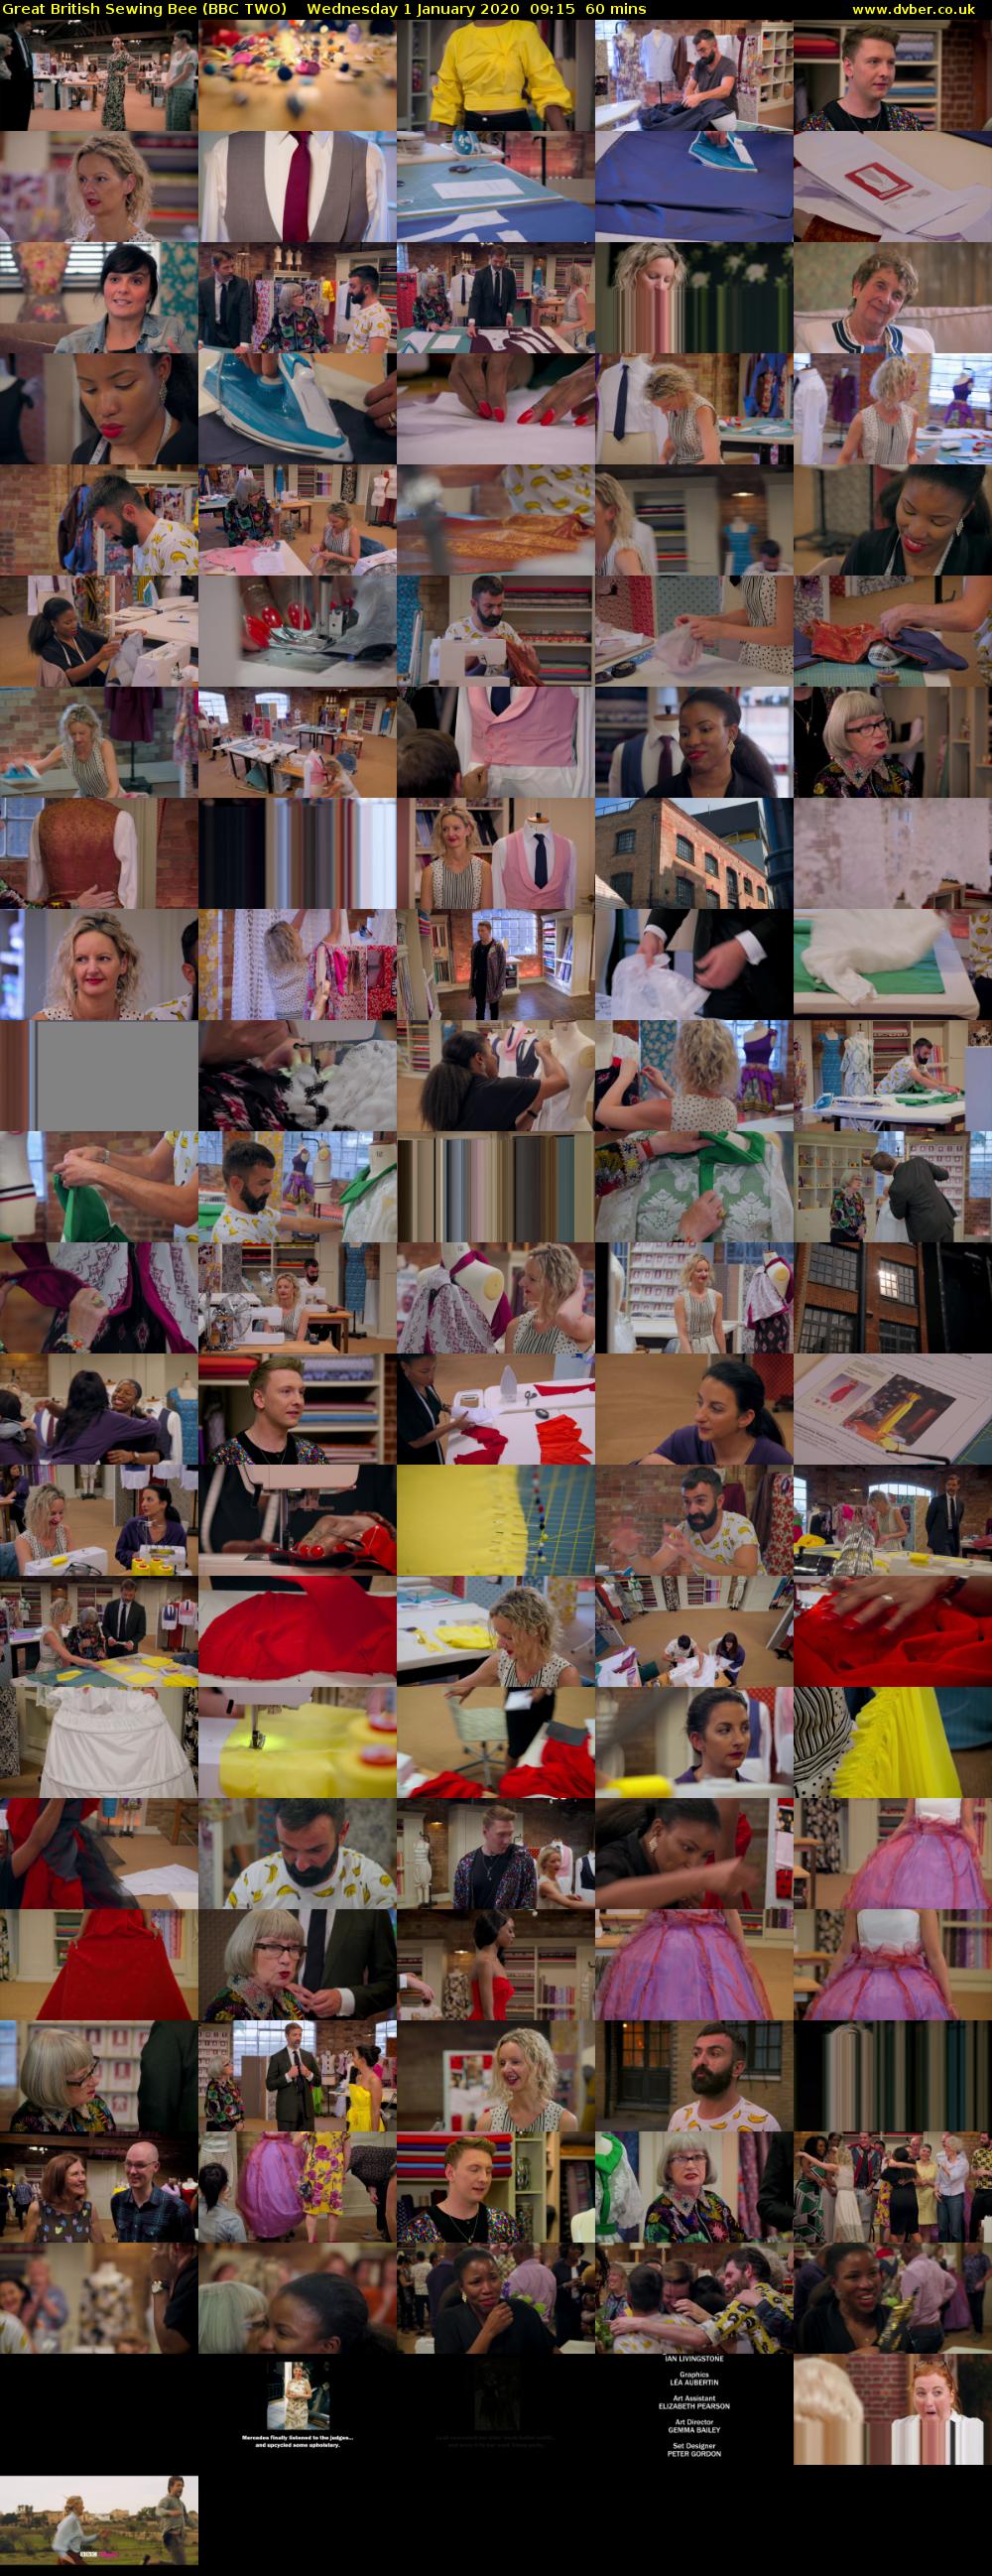 Great British Sewing Bee (BBC TWO) Wednesday 1 January 2020 09:15 - 10:15